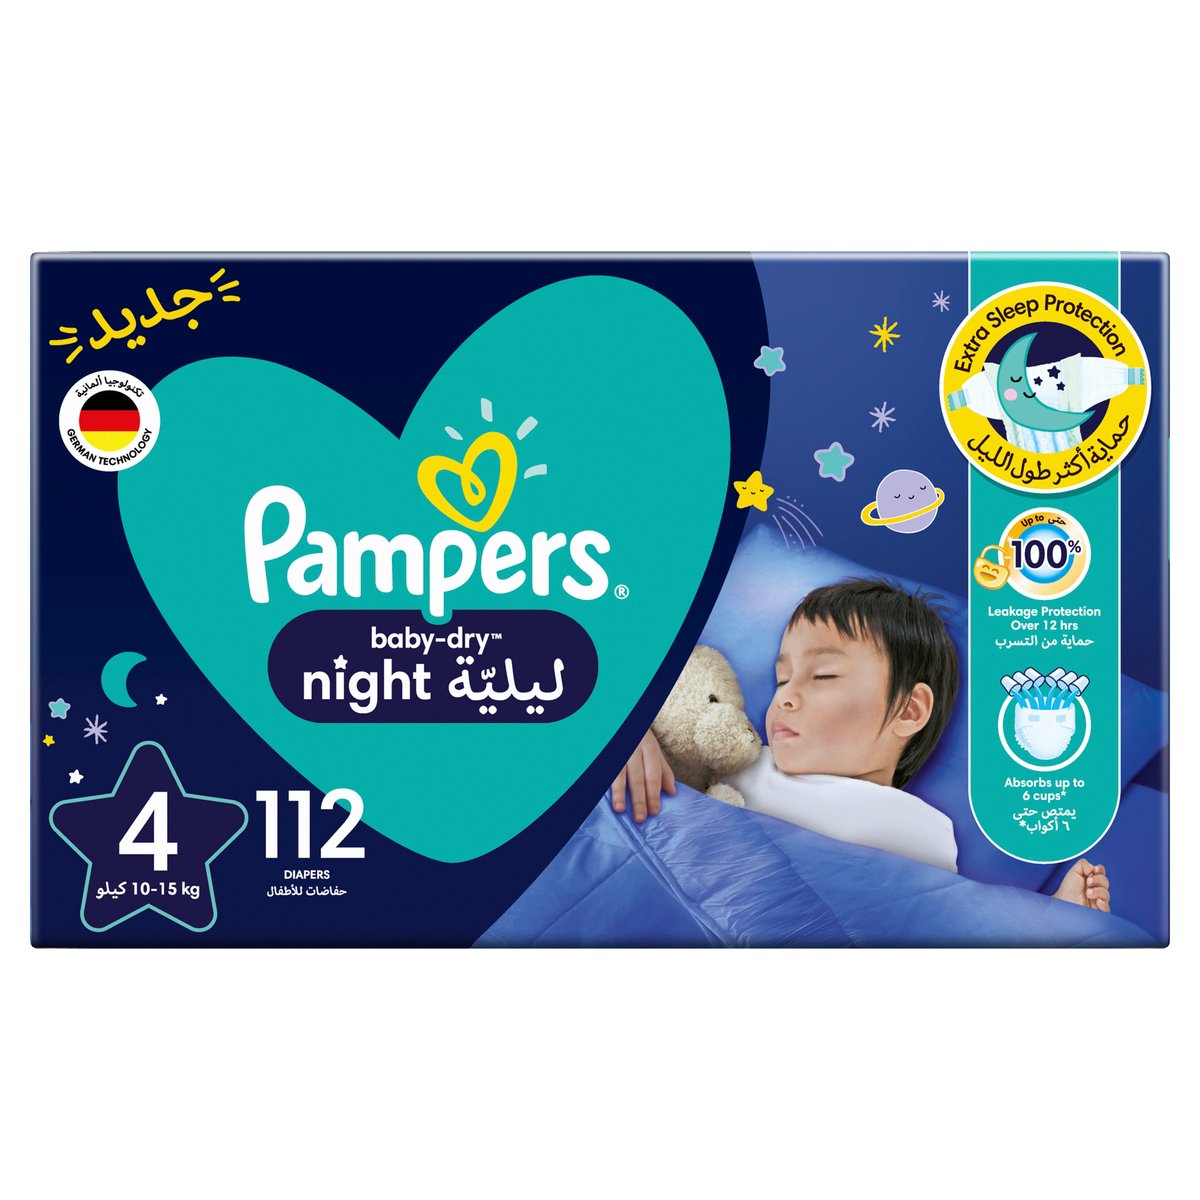 Pampers Baby-Dry Night Diapers Size 4 10-15kg 112pcs